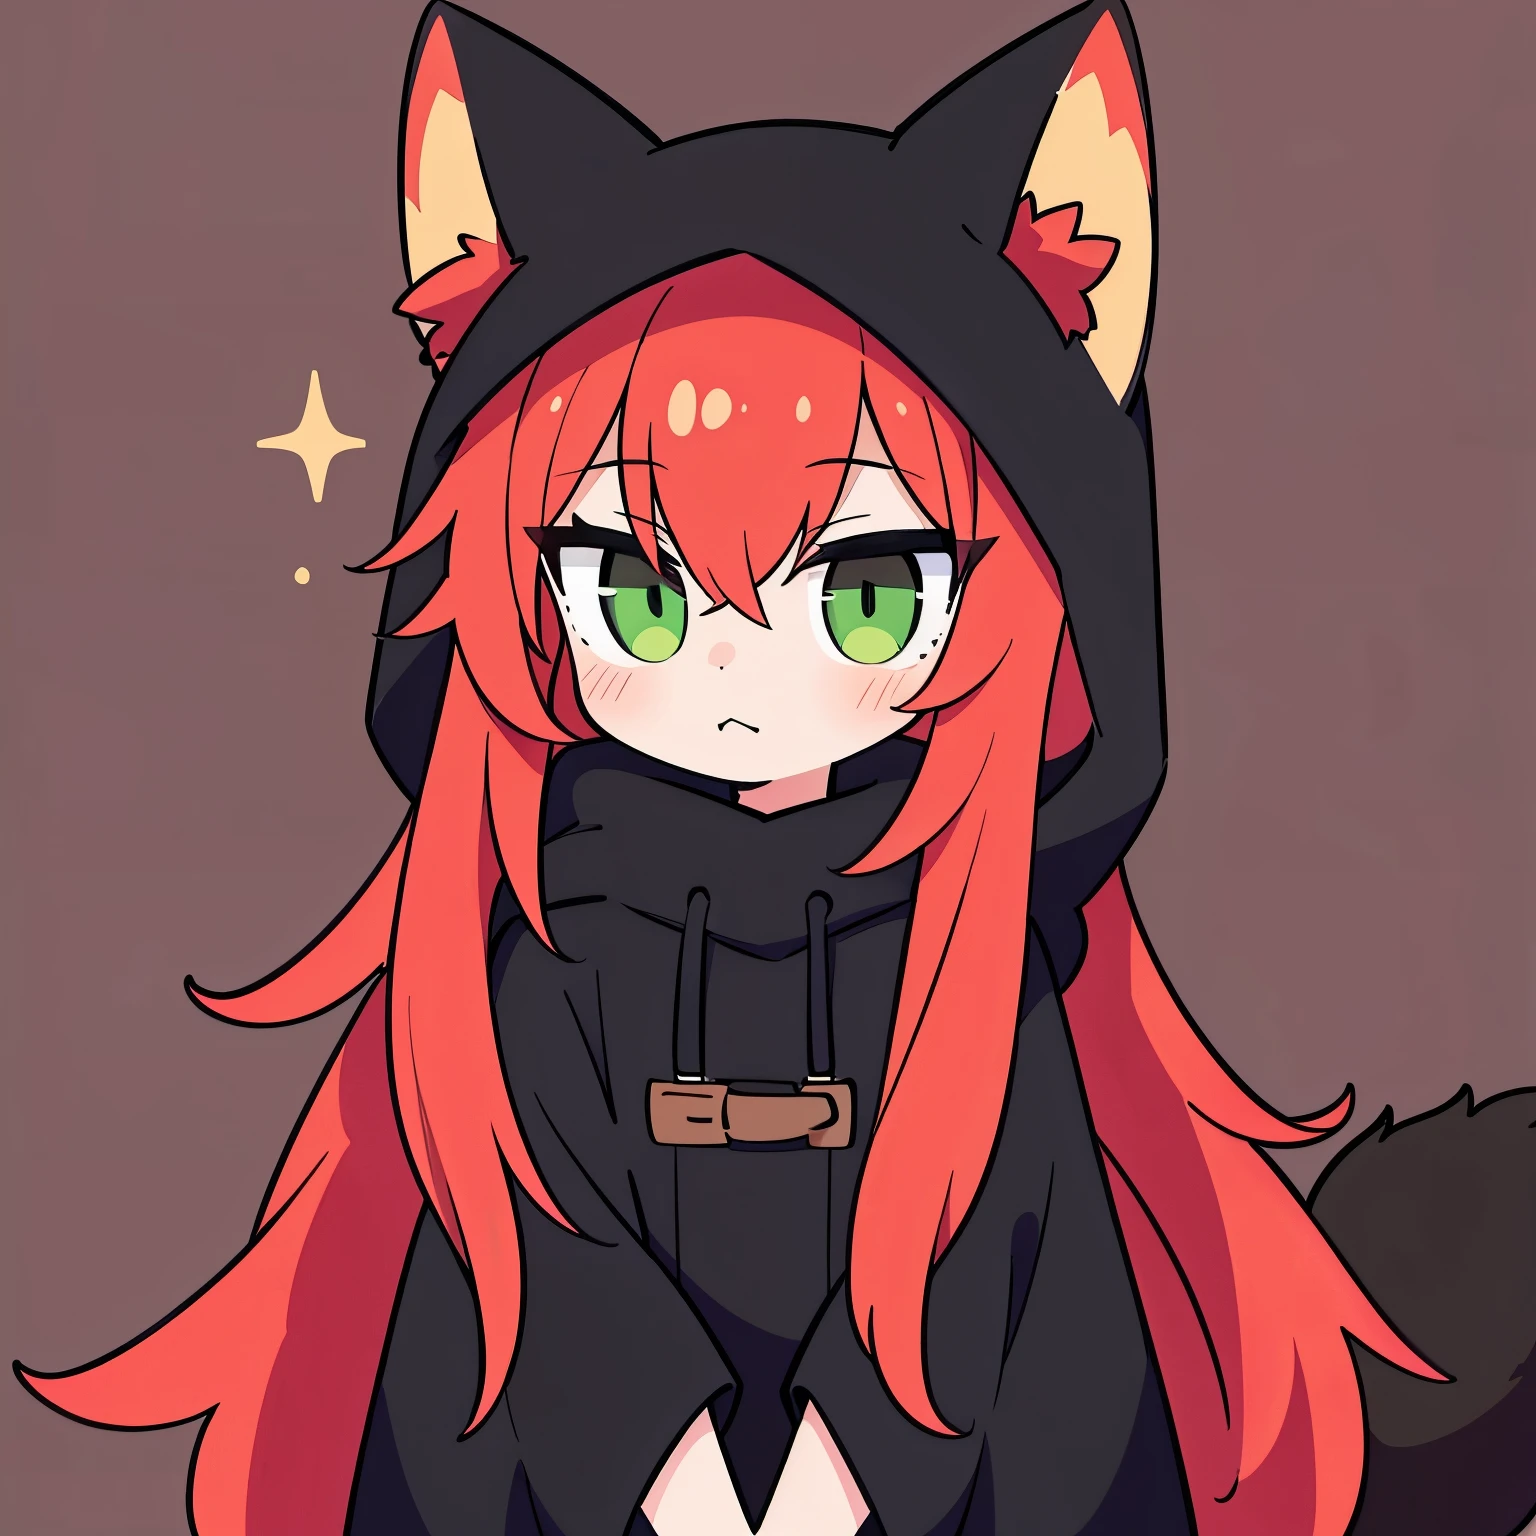 Anime girl with red hair and black outfit with cat ears - SeaArt AI